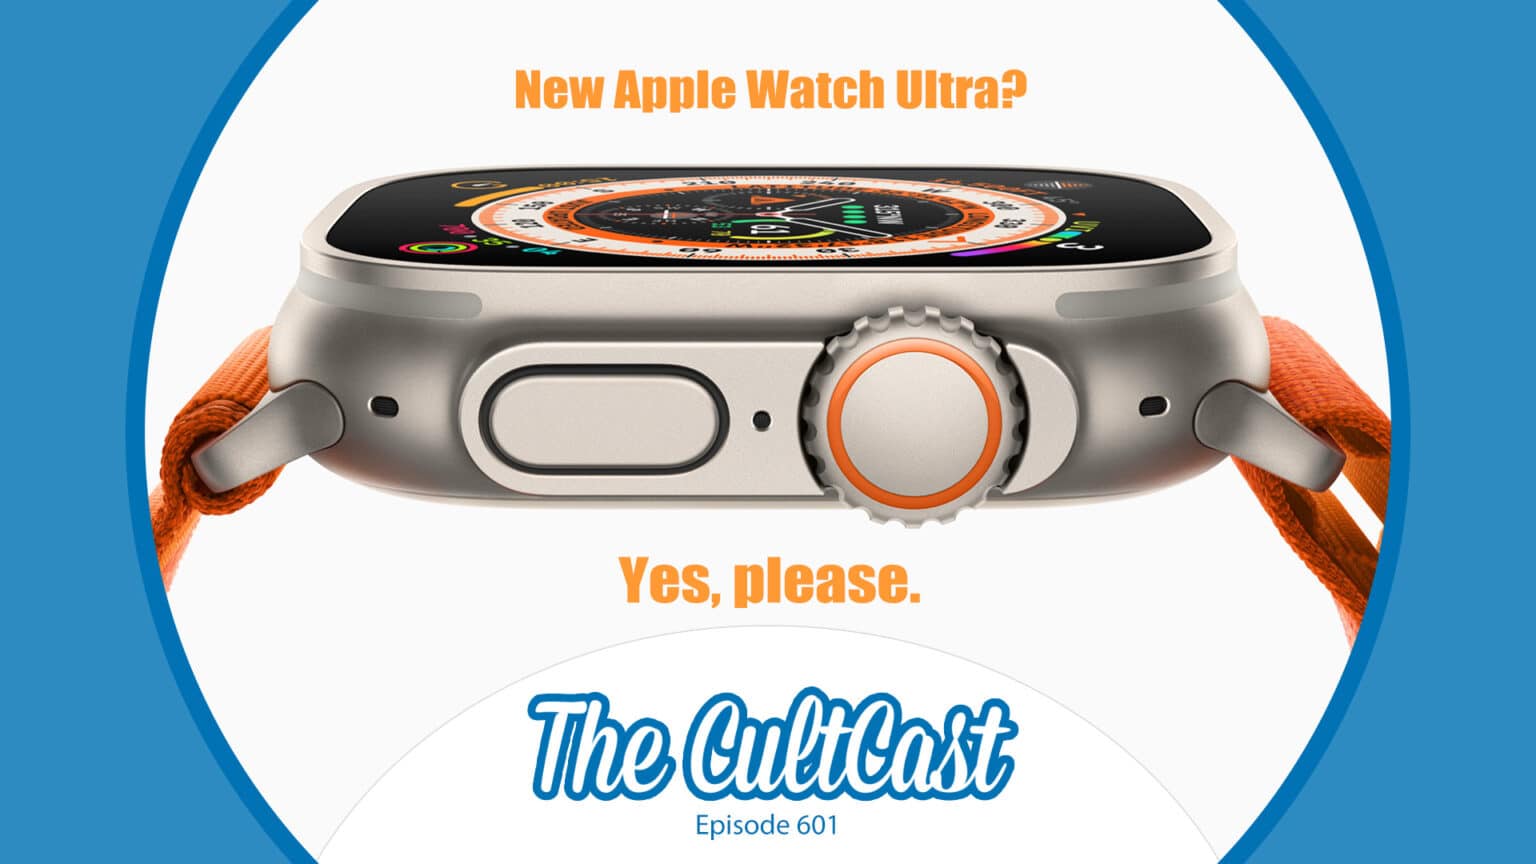 Apple Watch Ultra rumors on The CultCast episode No. 601.